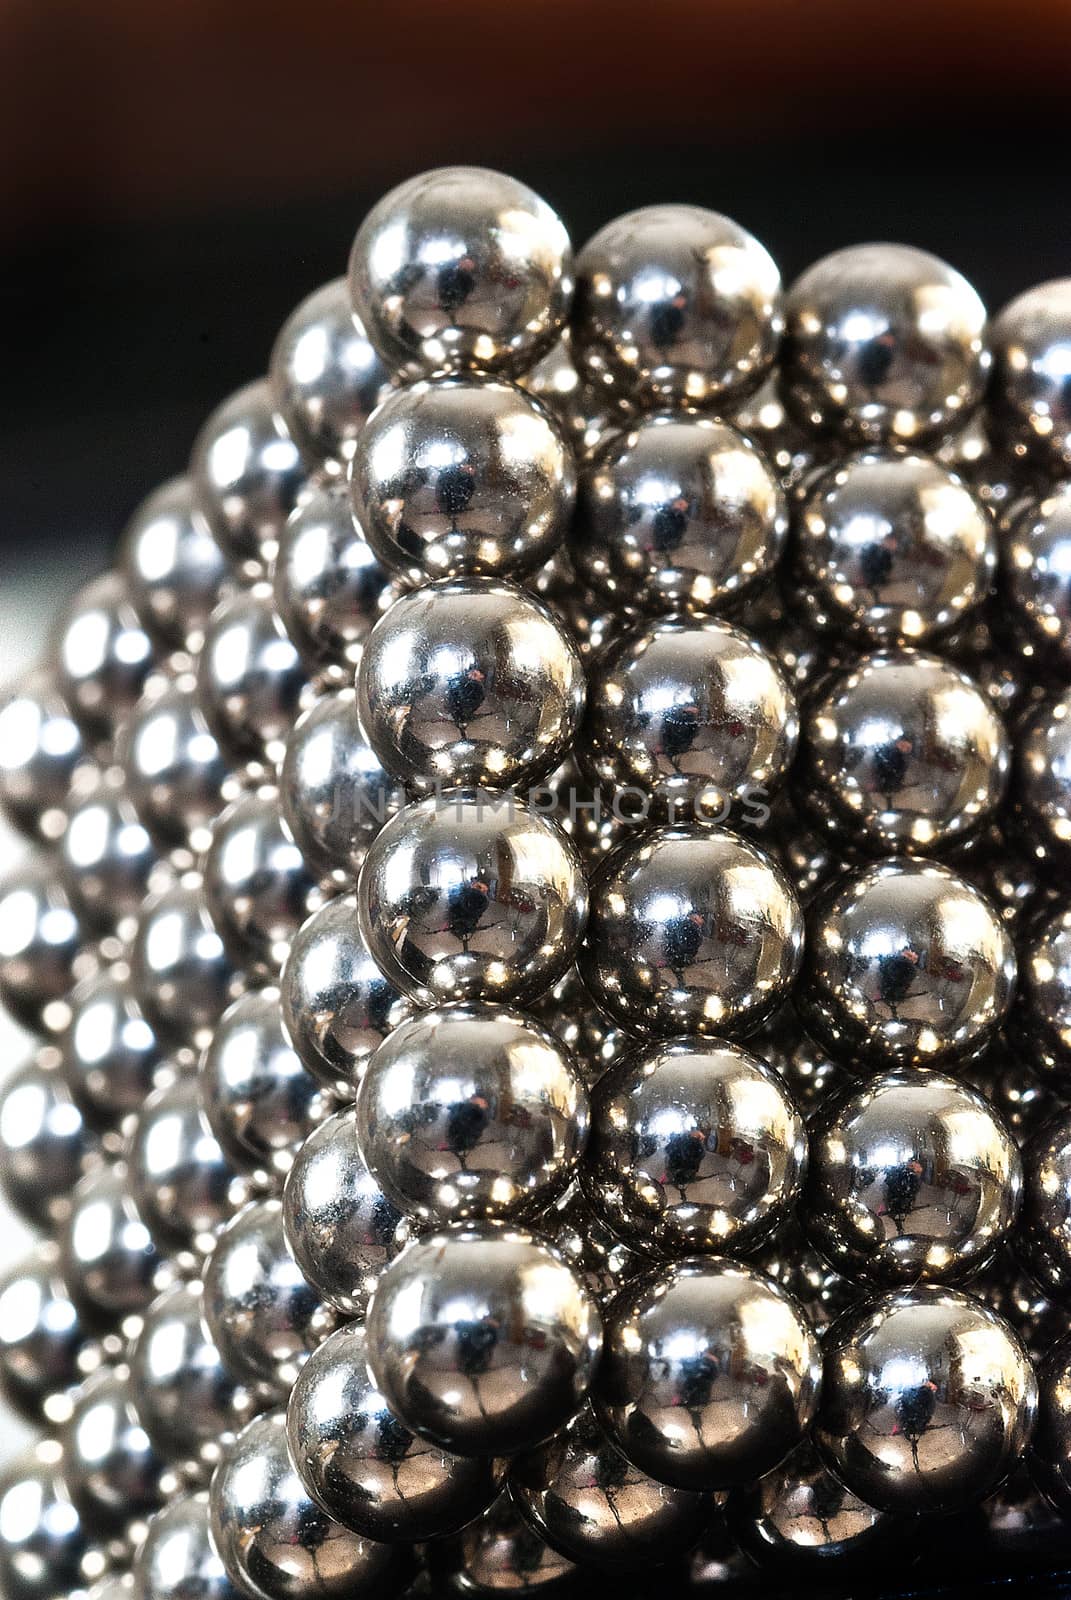 Macro schot of a cube composed of magnetic balls.